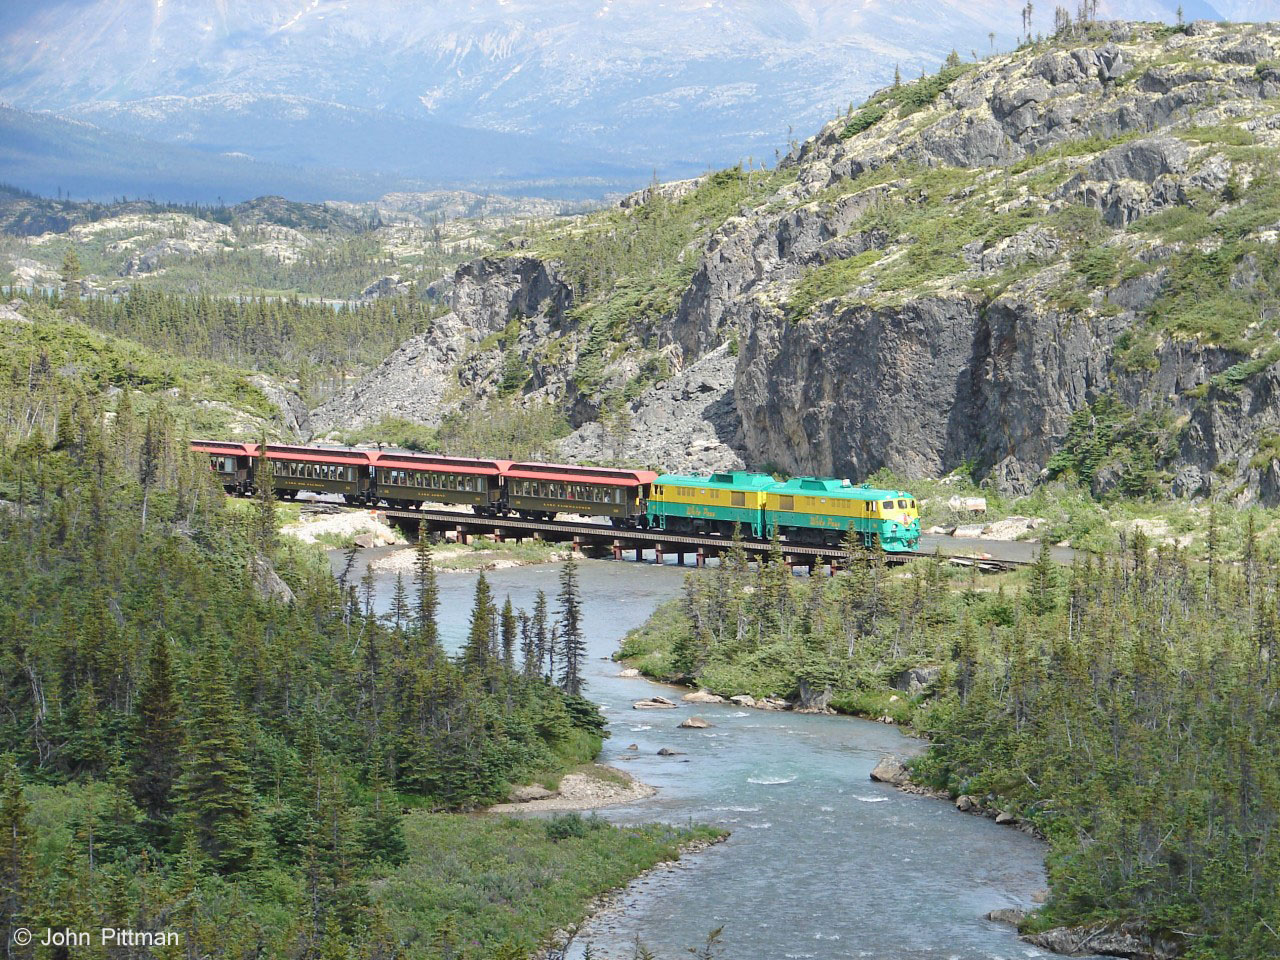 Approximately a mile south of Fraser depot (also south of the turning loop), the WP&YR crosses the river which carries water from Summit Lake to Bernard Lake.  I noted this scenic spot as I passed it driving north on the Klondike Highway some hours earlier, and hurried here to intercept the train I saw departing Fraser BC. 
The highway, river, and railway run parallel for a short distance south of here before diverging.  For most of its route, the White Pass & Yukon Railway is far from the nearest road, often the far side of a river, lake, or rugged terrain.  
If the  weather cooperates, this is a great place to photograph a train.  But it is Pacific coastal mountain territory so cloud and rain happen.   
Anyone interested in learning more about "North America's busiest tourist railroad" can find the May 2006 Trains Magazine article online at:  http://wpyr.com/railfans/trains-magazine/   
Another magazine article on the WP&YR official site is:   http://wpyr.com/railfans/railways-illustrated/
The WP&YR is currently owned by TWC Enterprises Limited of King City Ontario.